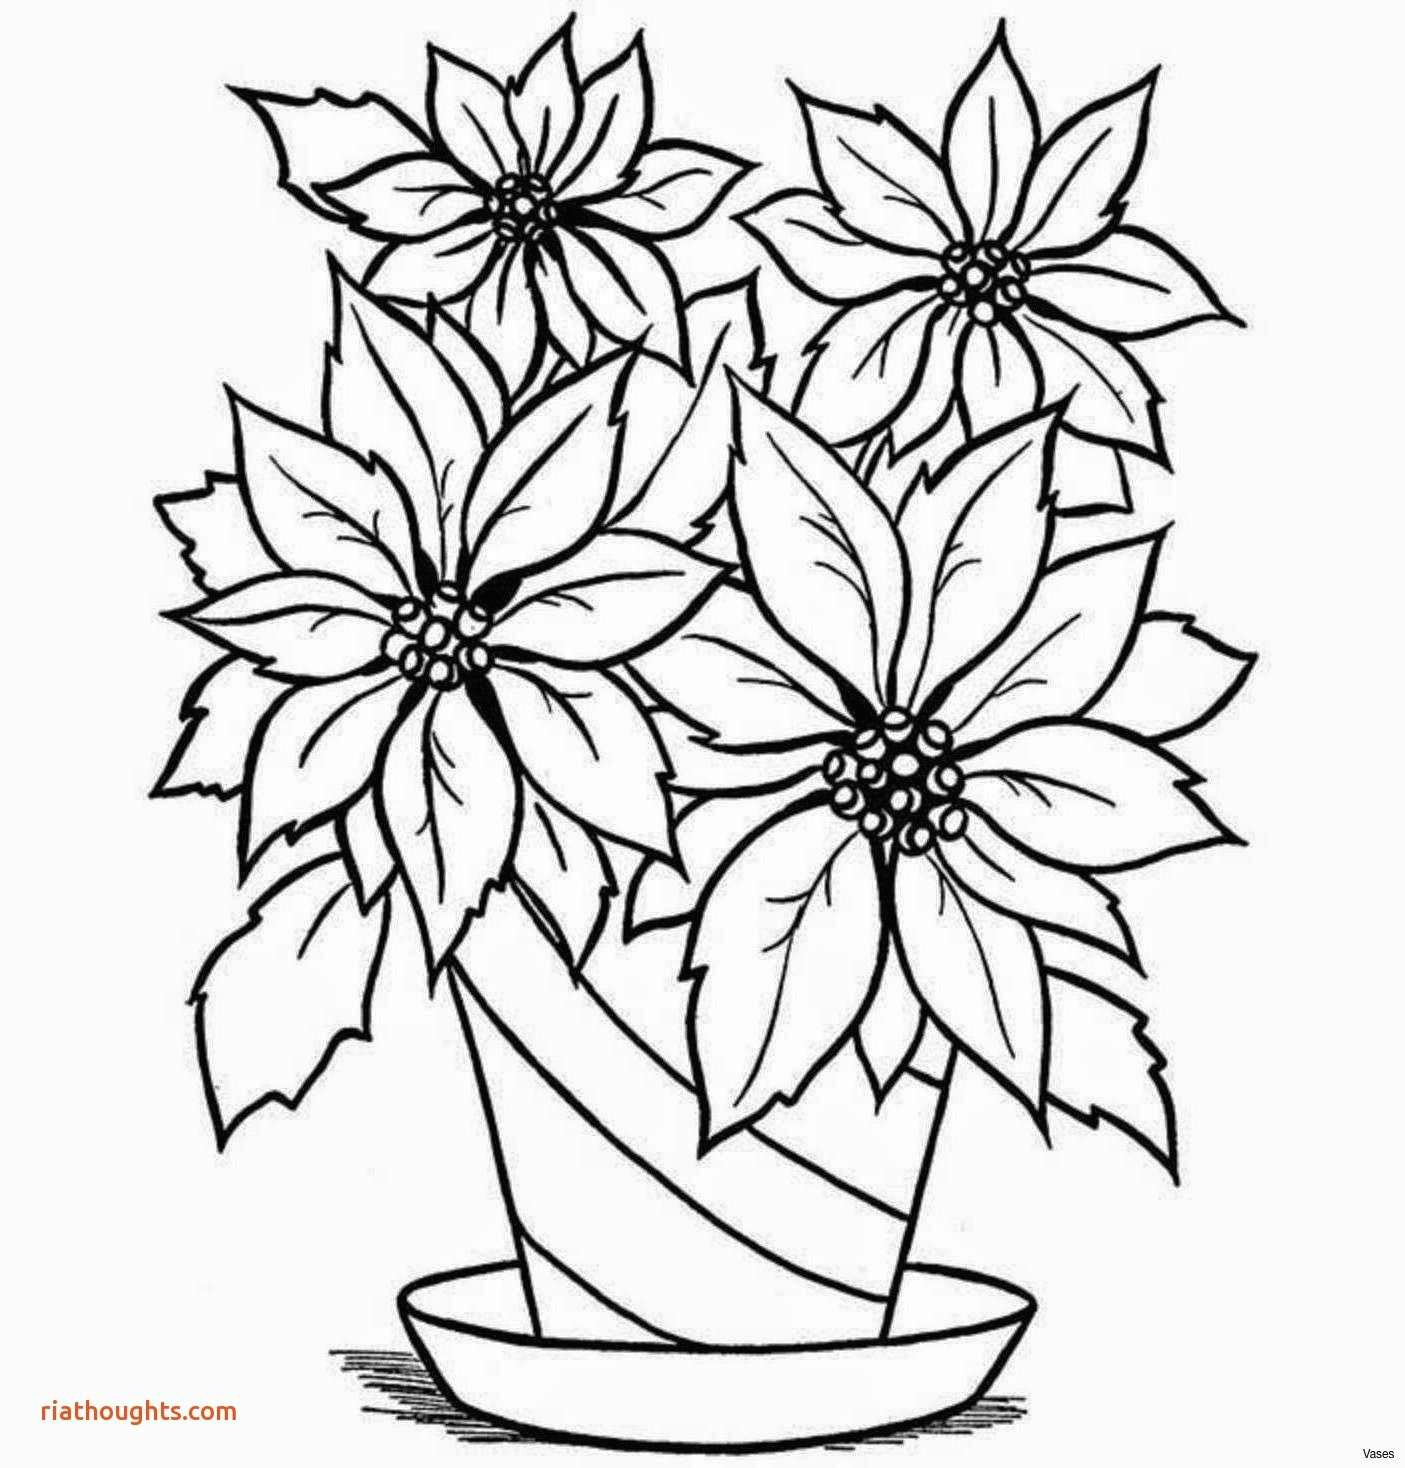 Drawing Images Of Flower Designs 25 Fancy Draw A Flower Helpsite Us